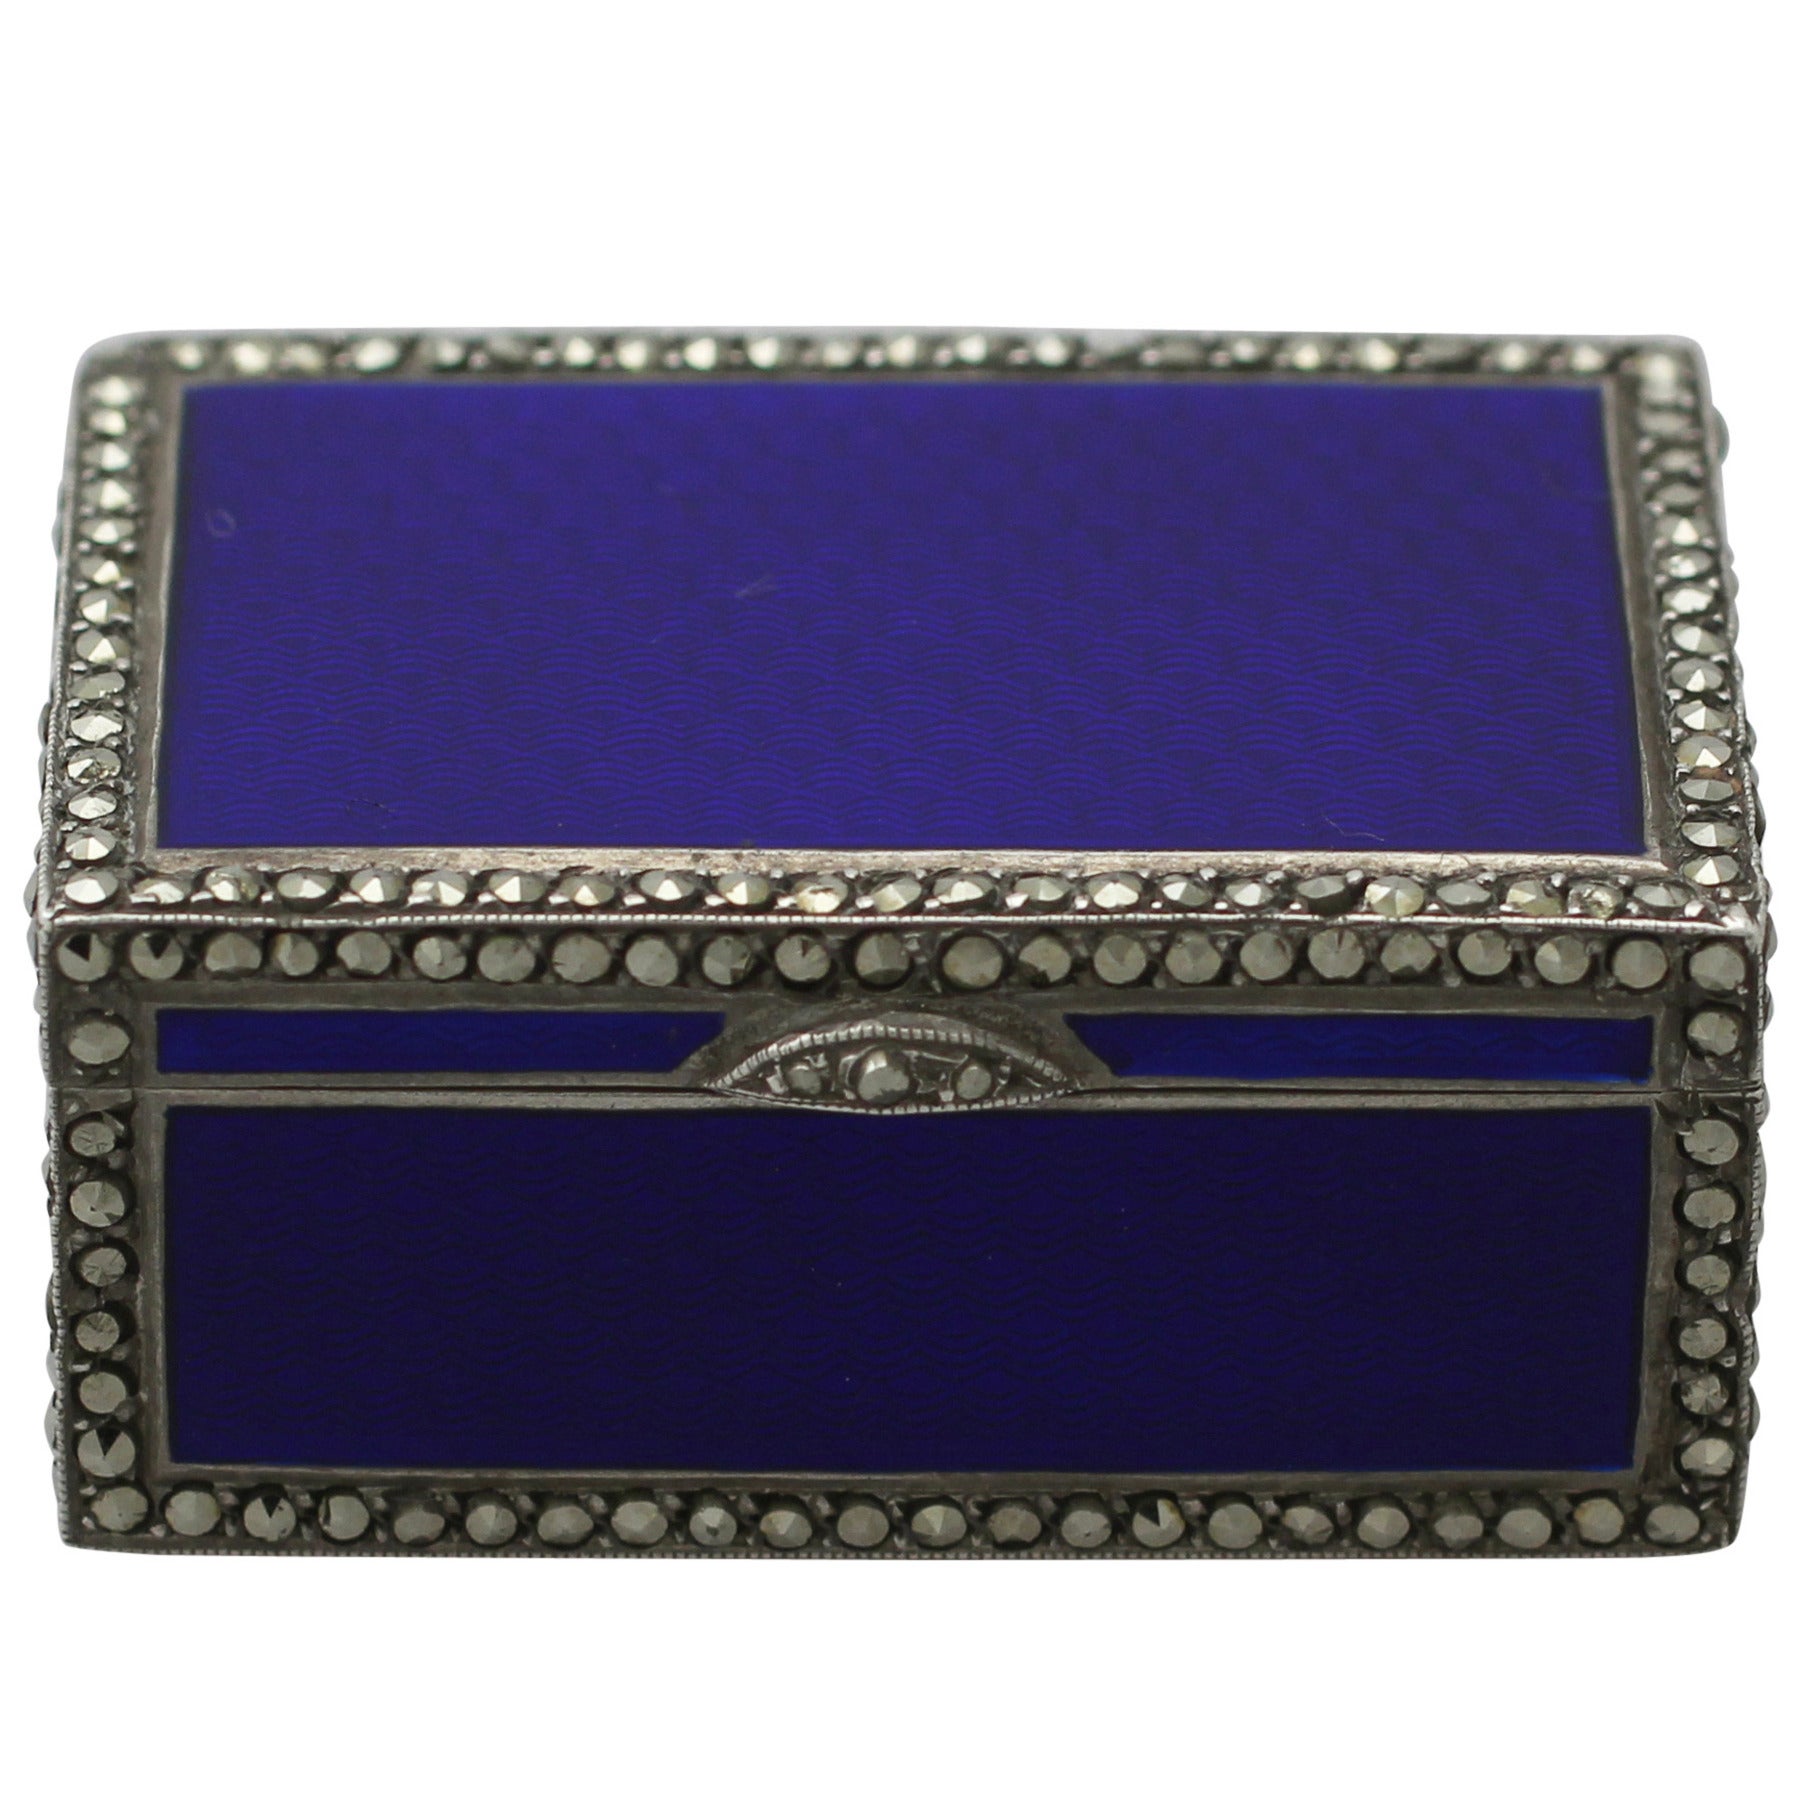 1900s Sterling Silver, Enamel and Marcasite Miniature Music Box